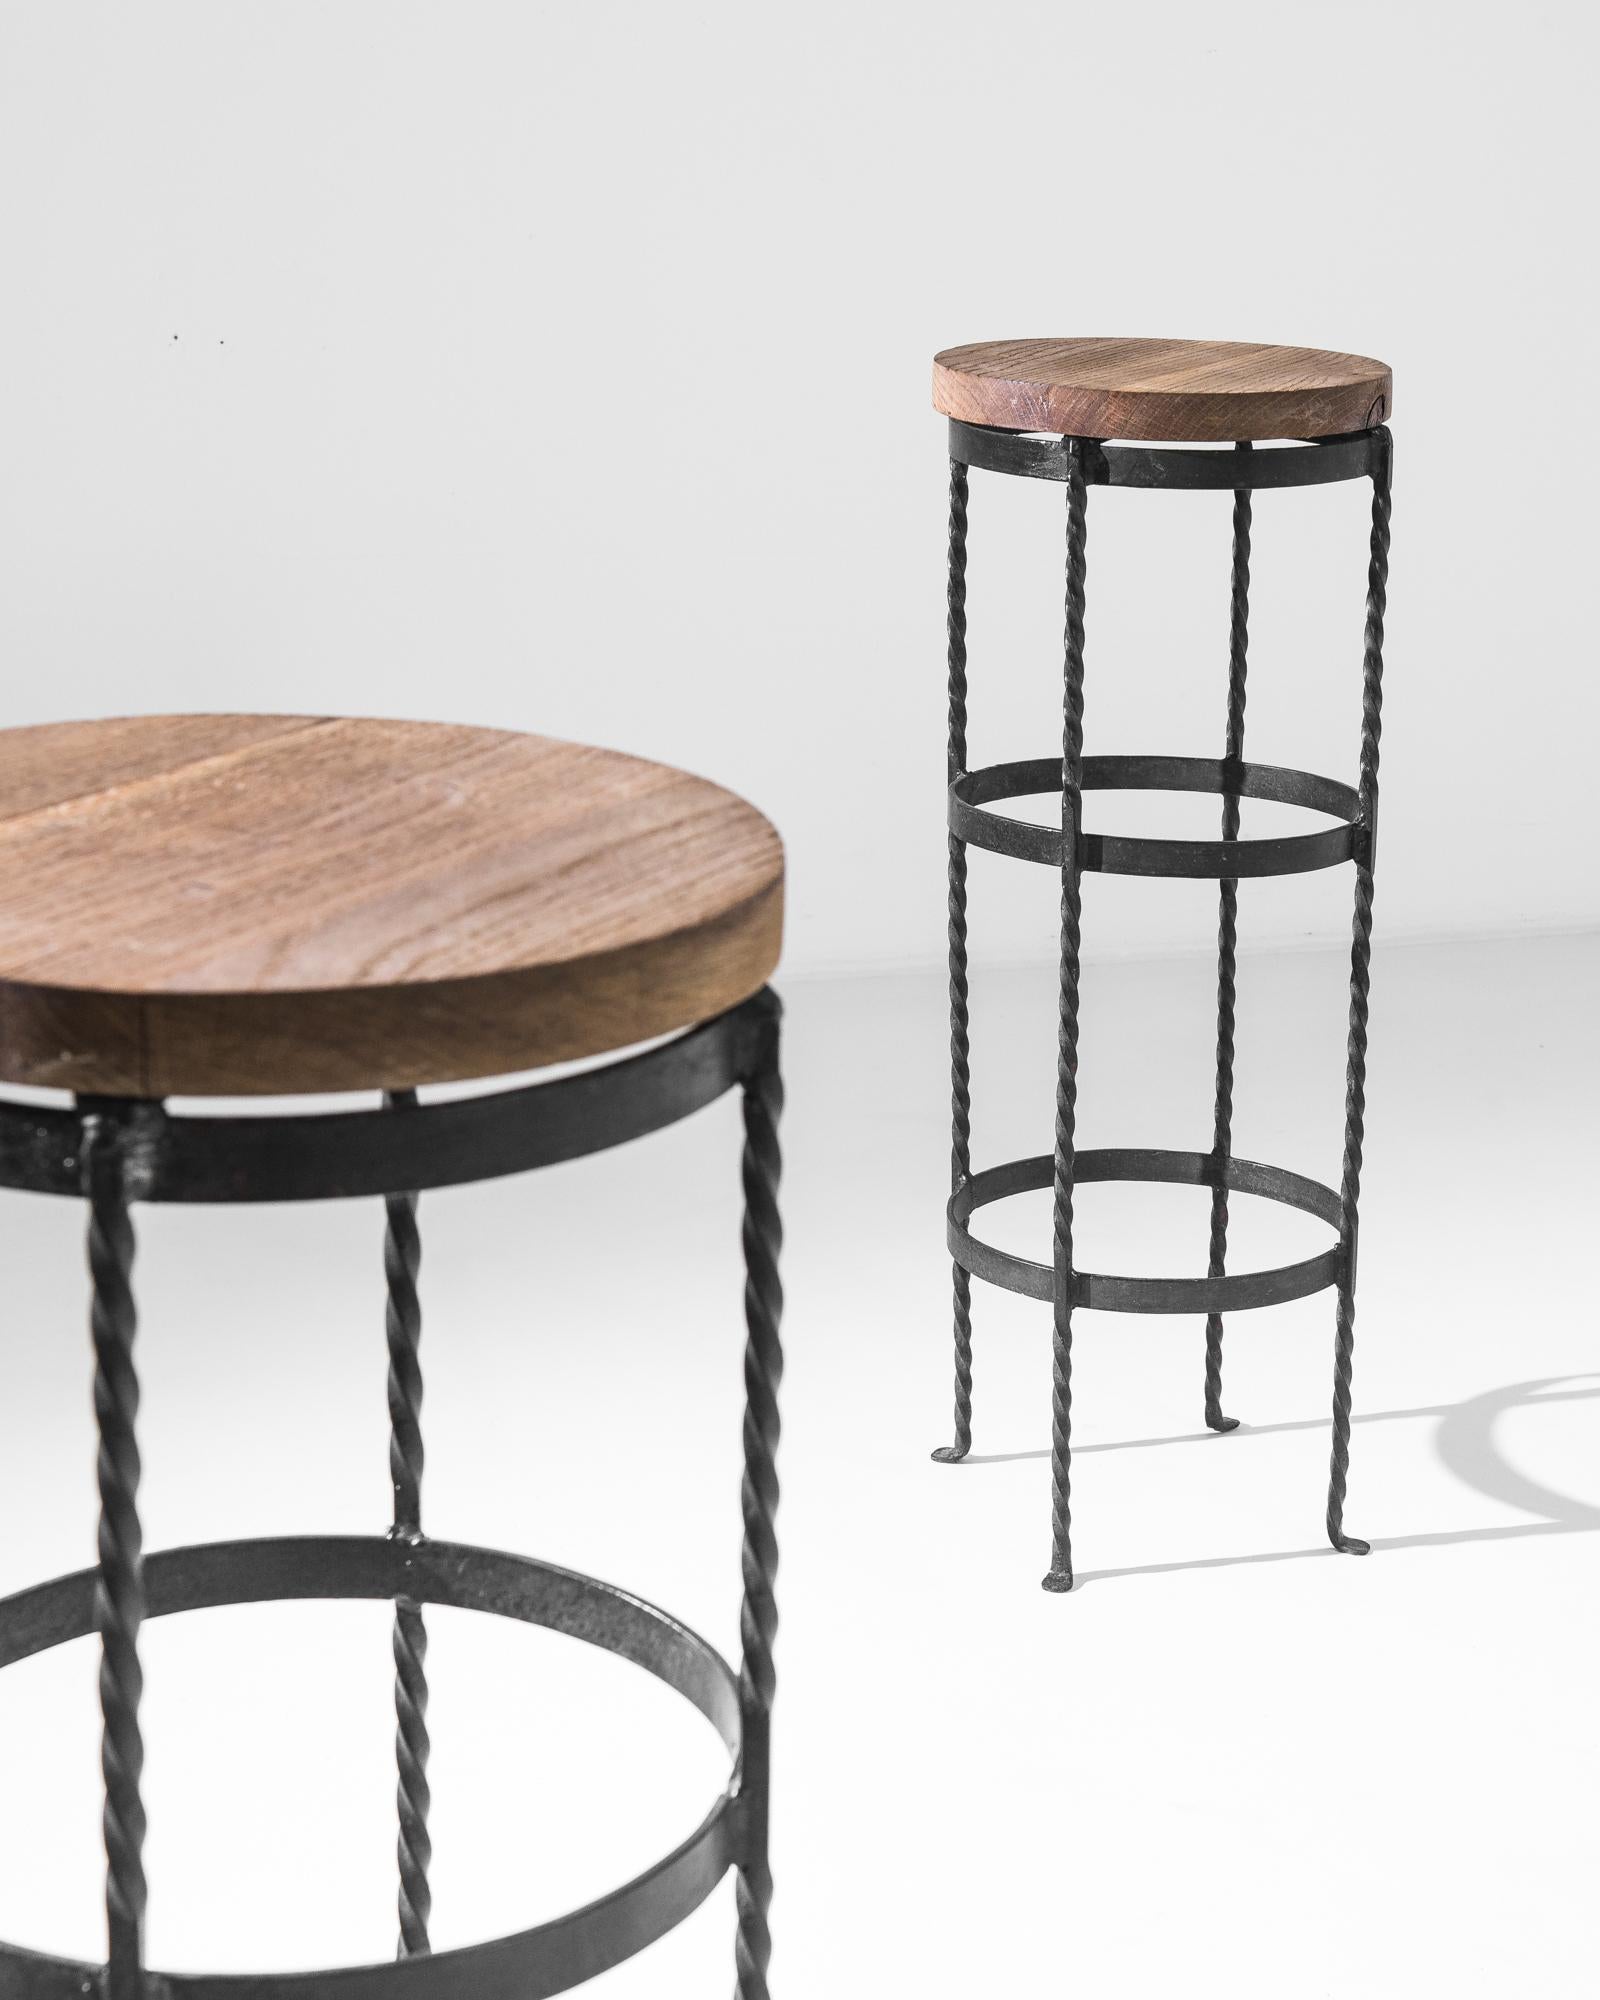 This pair of vintage metal stools was produced in Belgium, circa 1960. A thick cut of wood lays upon high twirled legs, belted by three metal rings. The association of the wrought iron and the natural wood offers a pleasing contrast of materials and